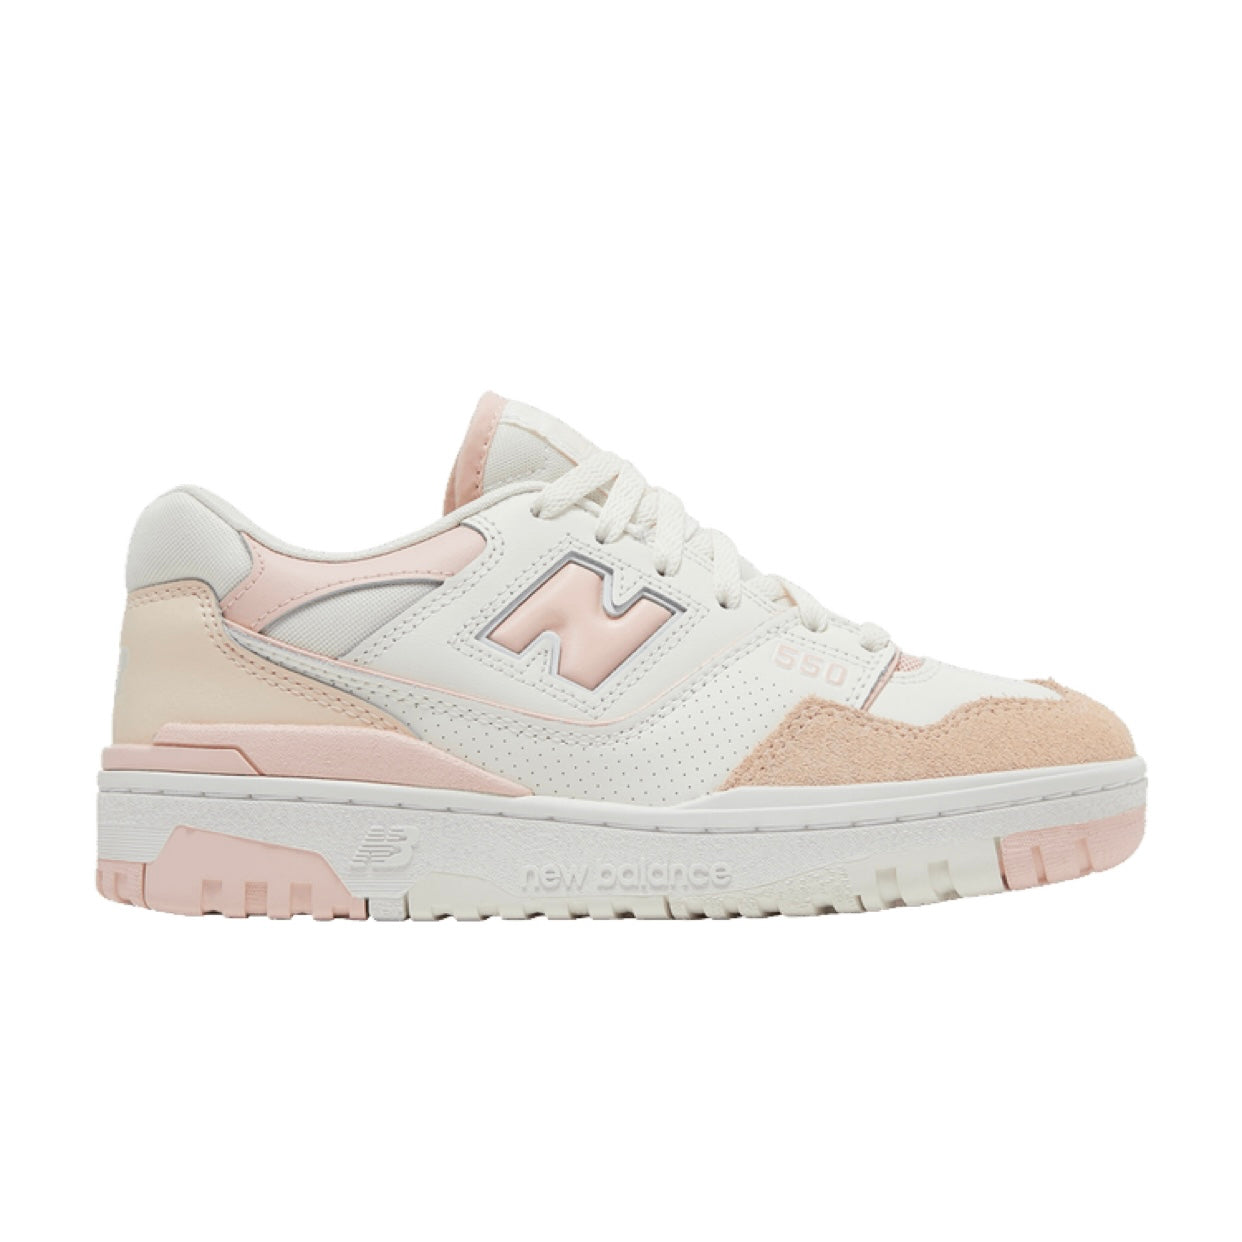 Incubus Chip dictator New Balance 550, White Pink (Women's)